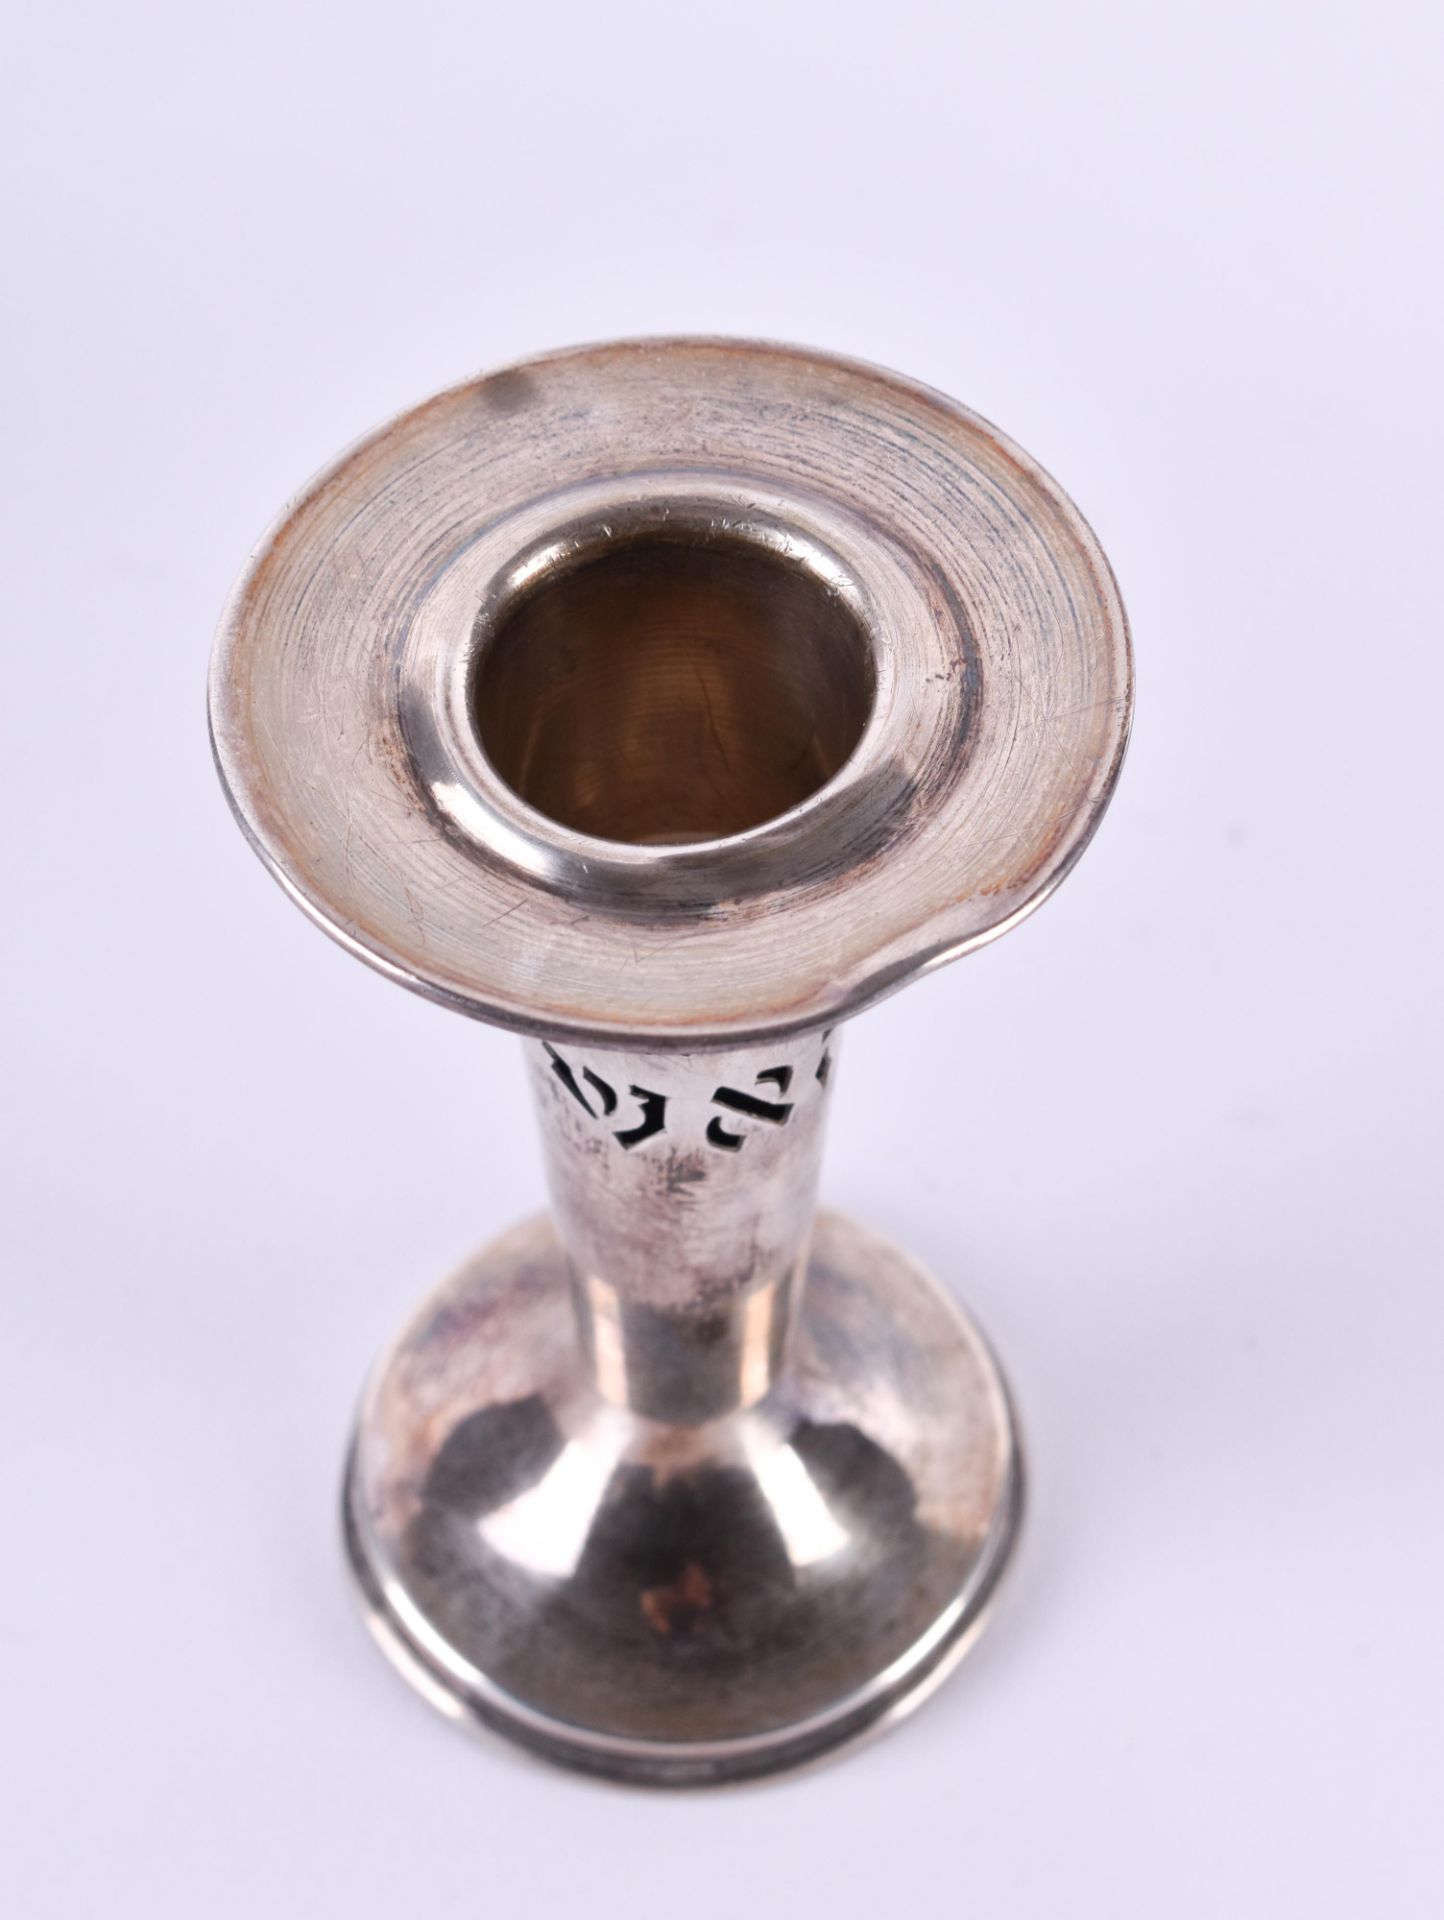 Silver candlestick Judaica - Image 2 of 4